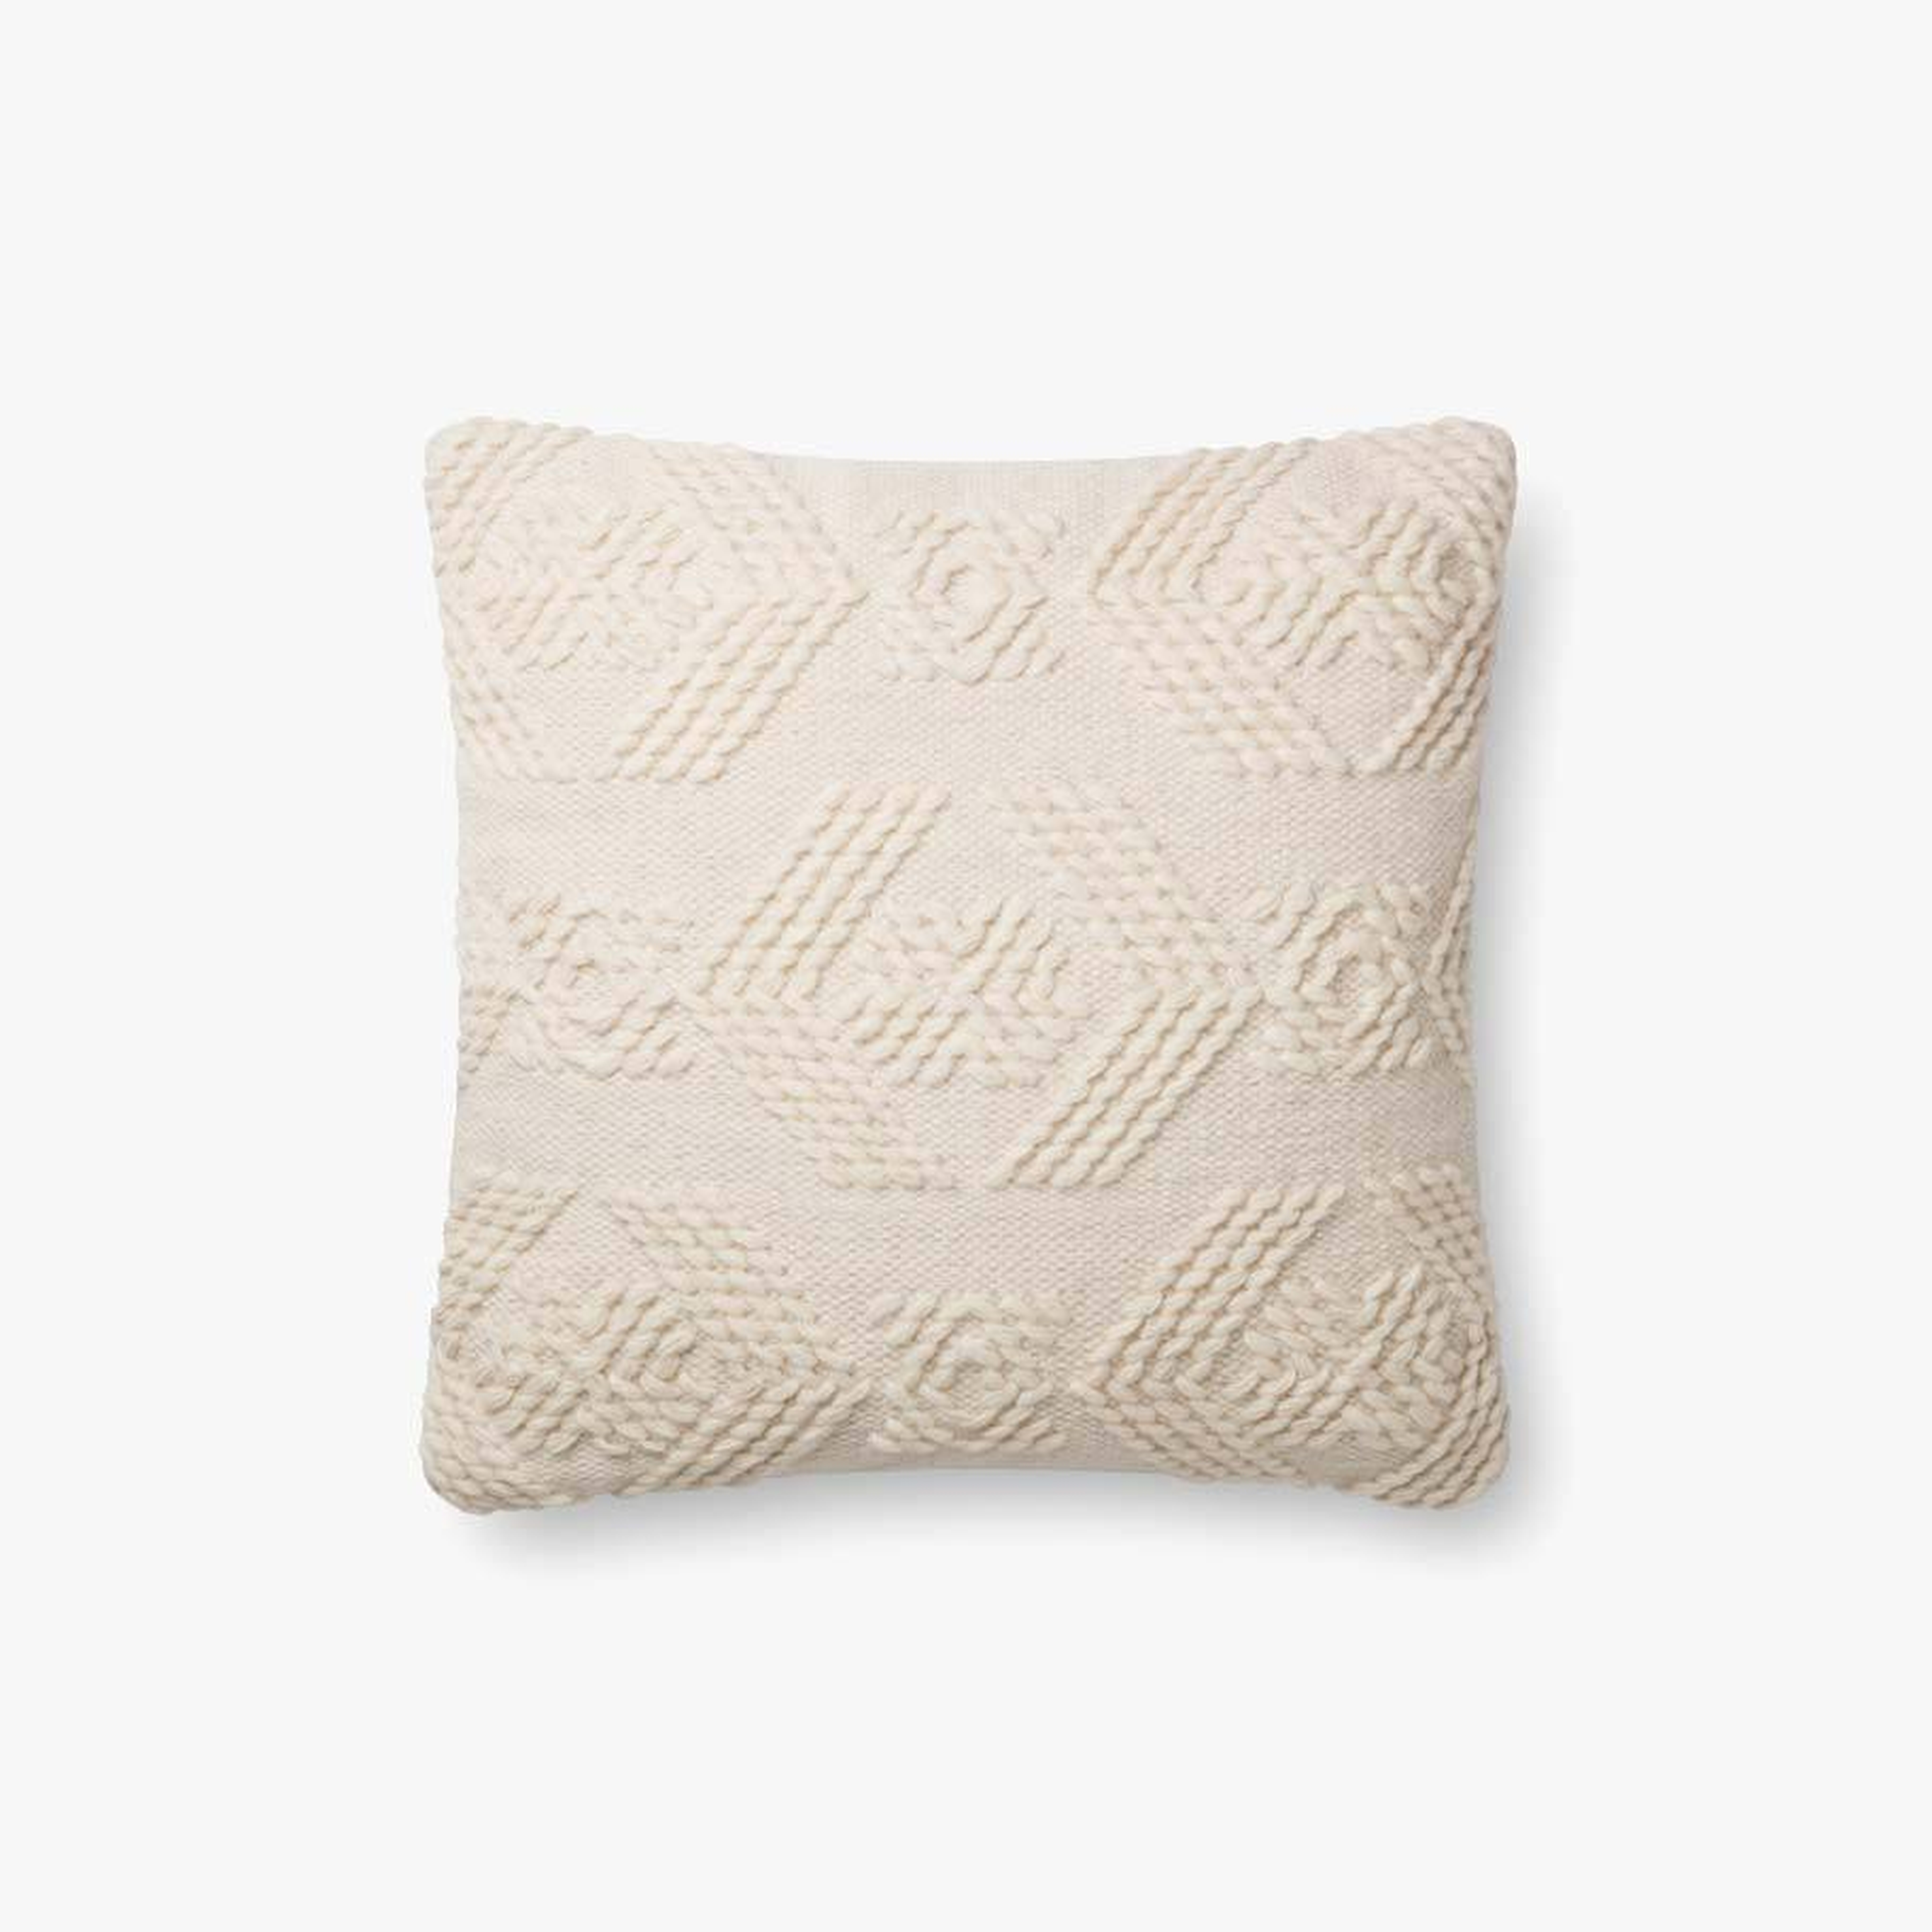 Embroidered Pillow Cover, Ivory, 18" x 18" - Loloi Rugs